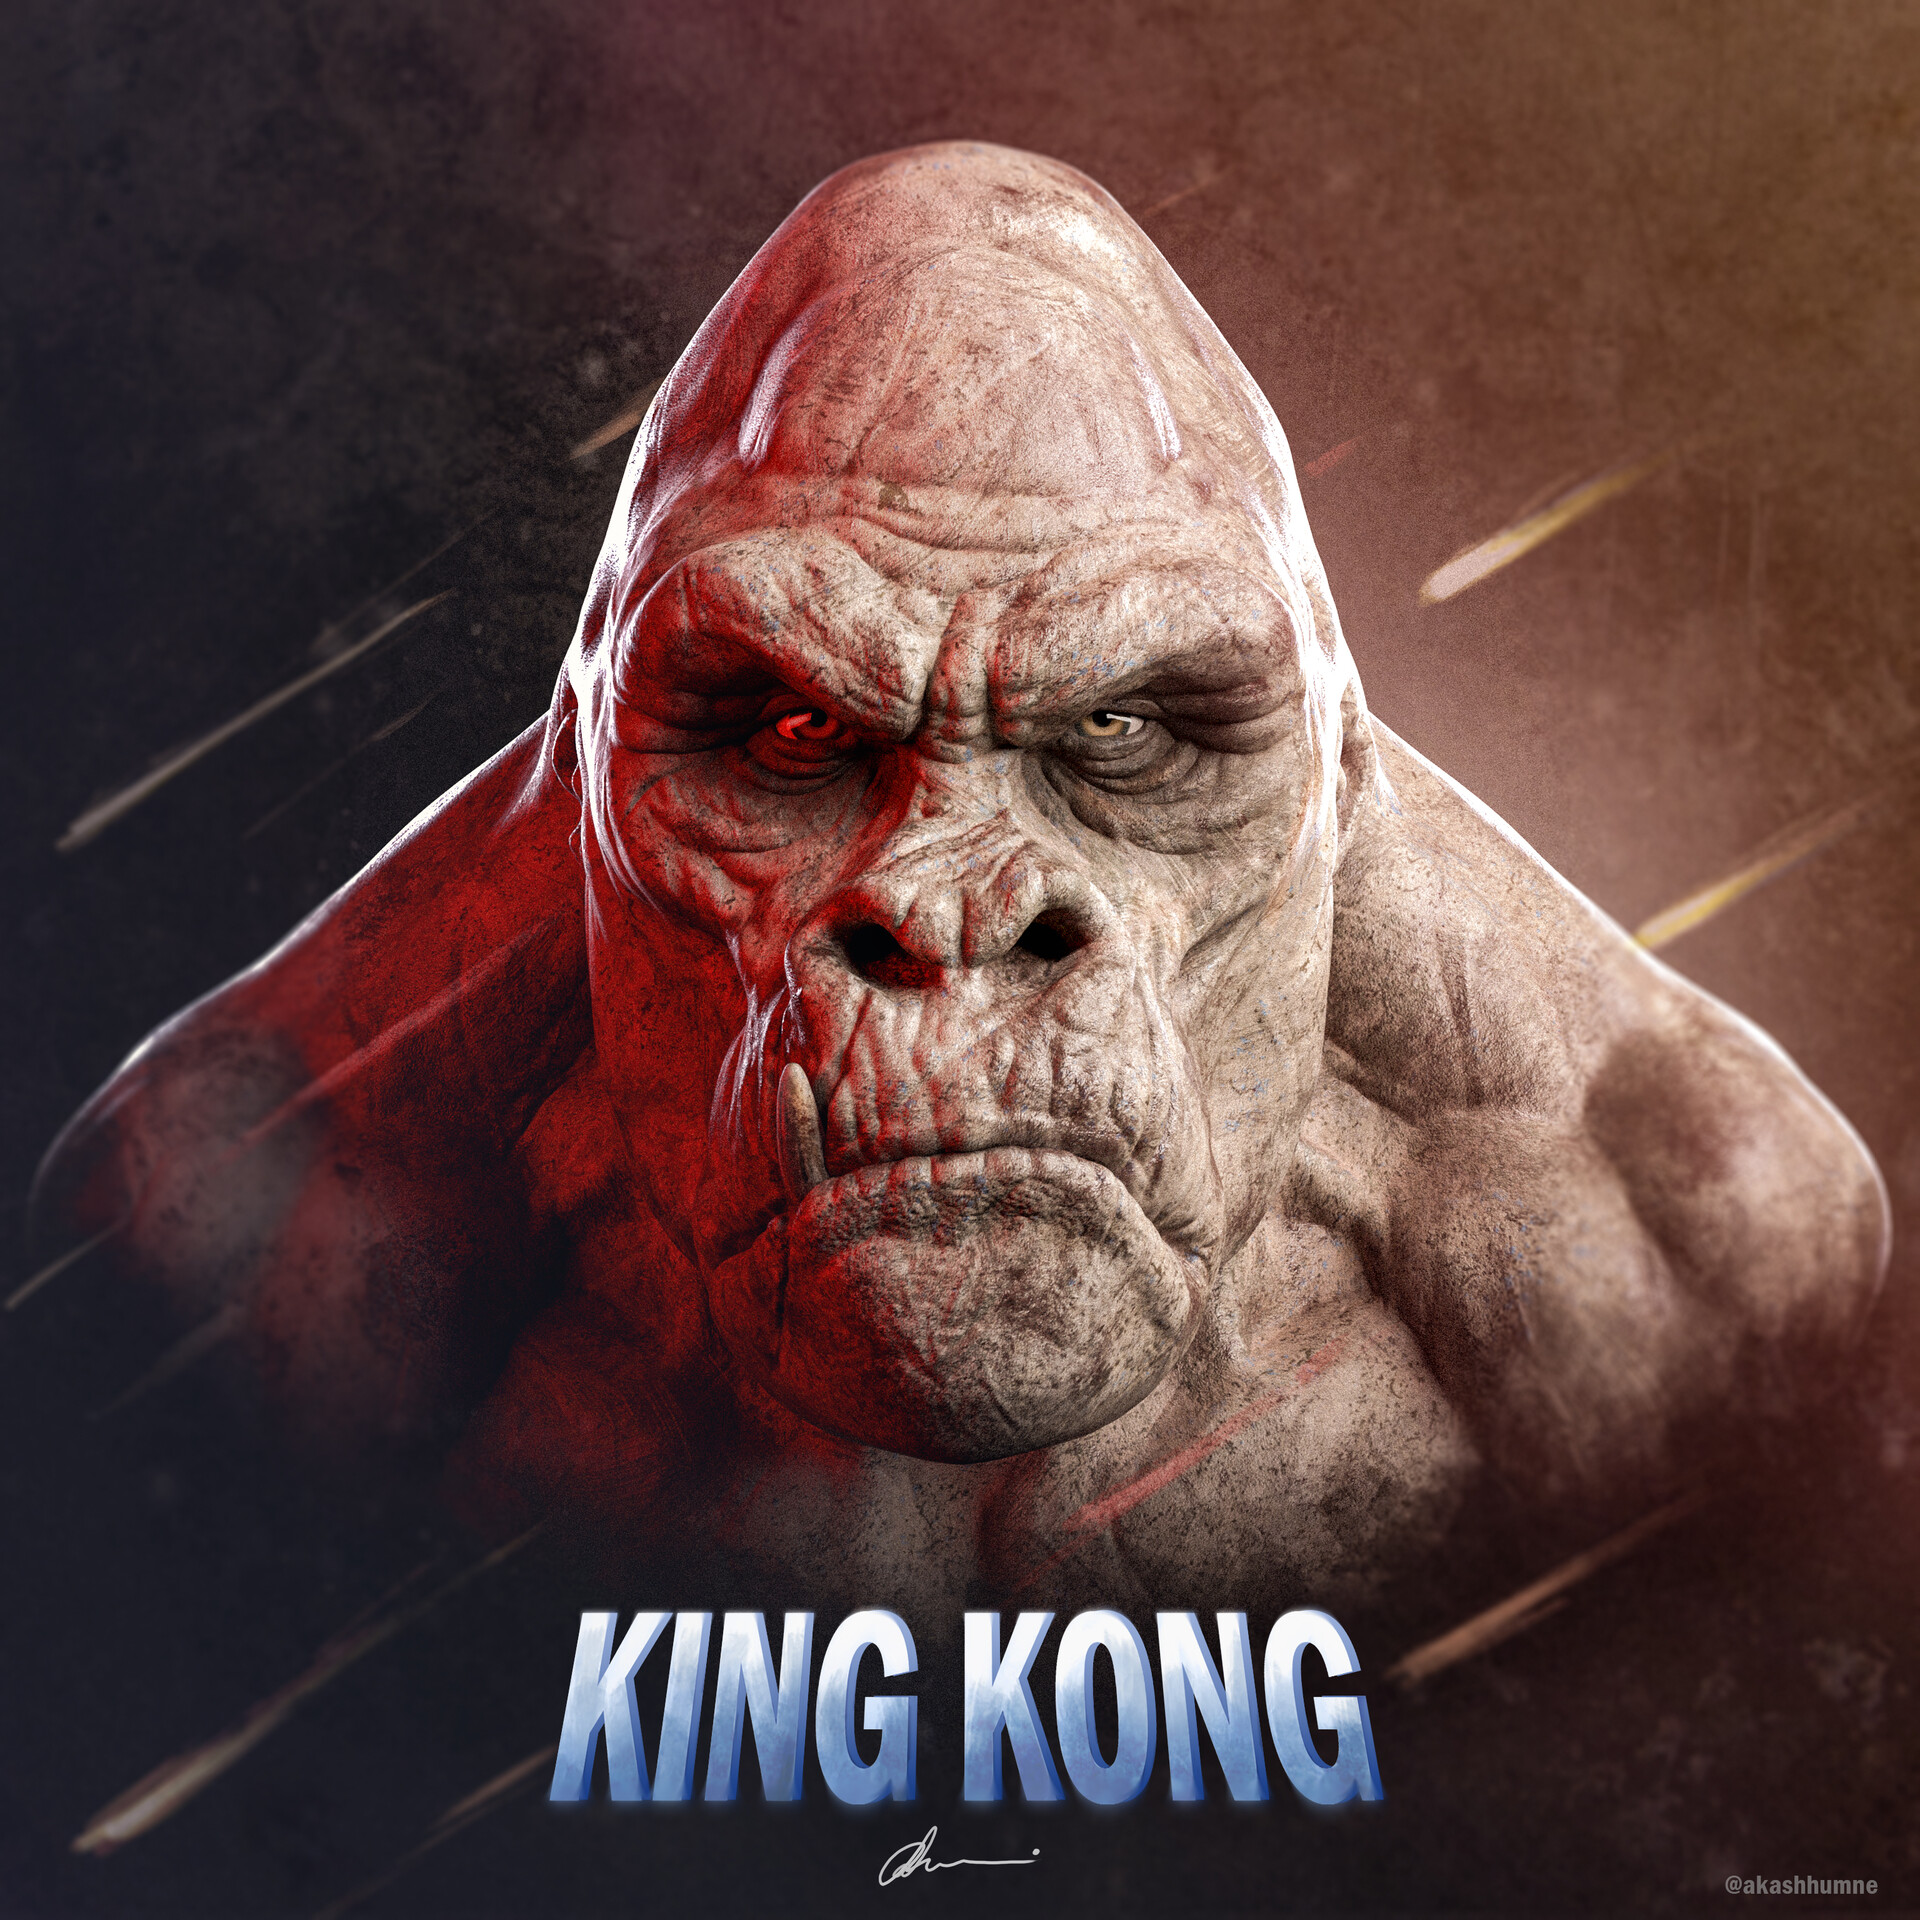 Gorilla King KoNg wallpaper by Vicky_Vick - Download on ZEDGE™ | 615a